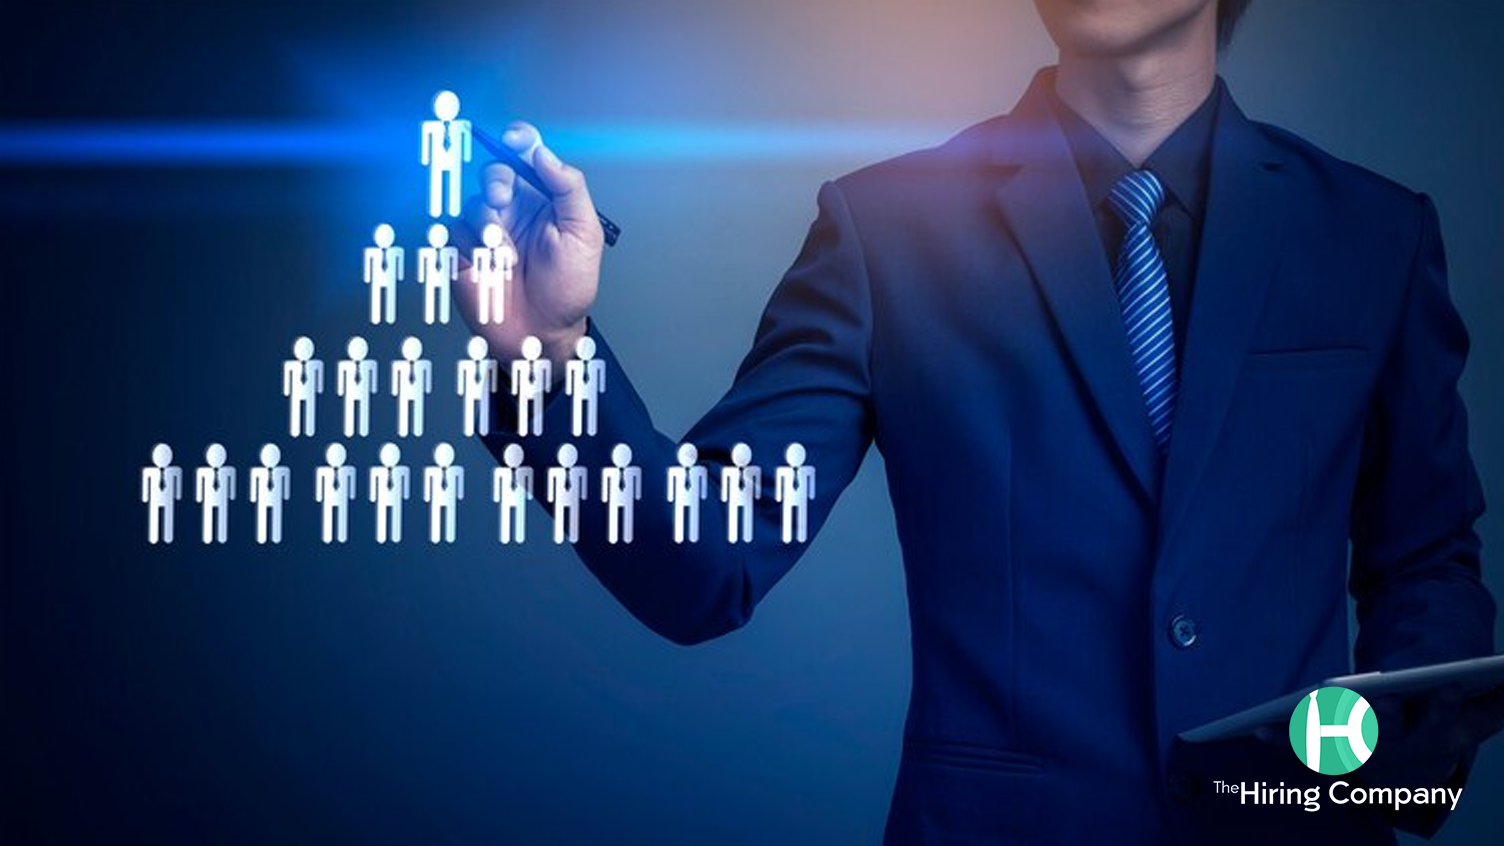 Crowdsourcing: The Recruiter’s Perspective